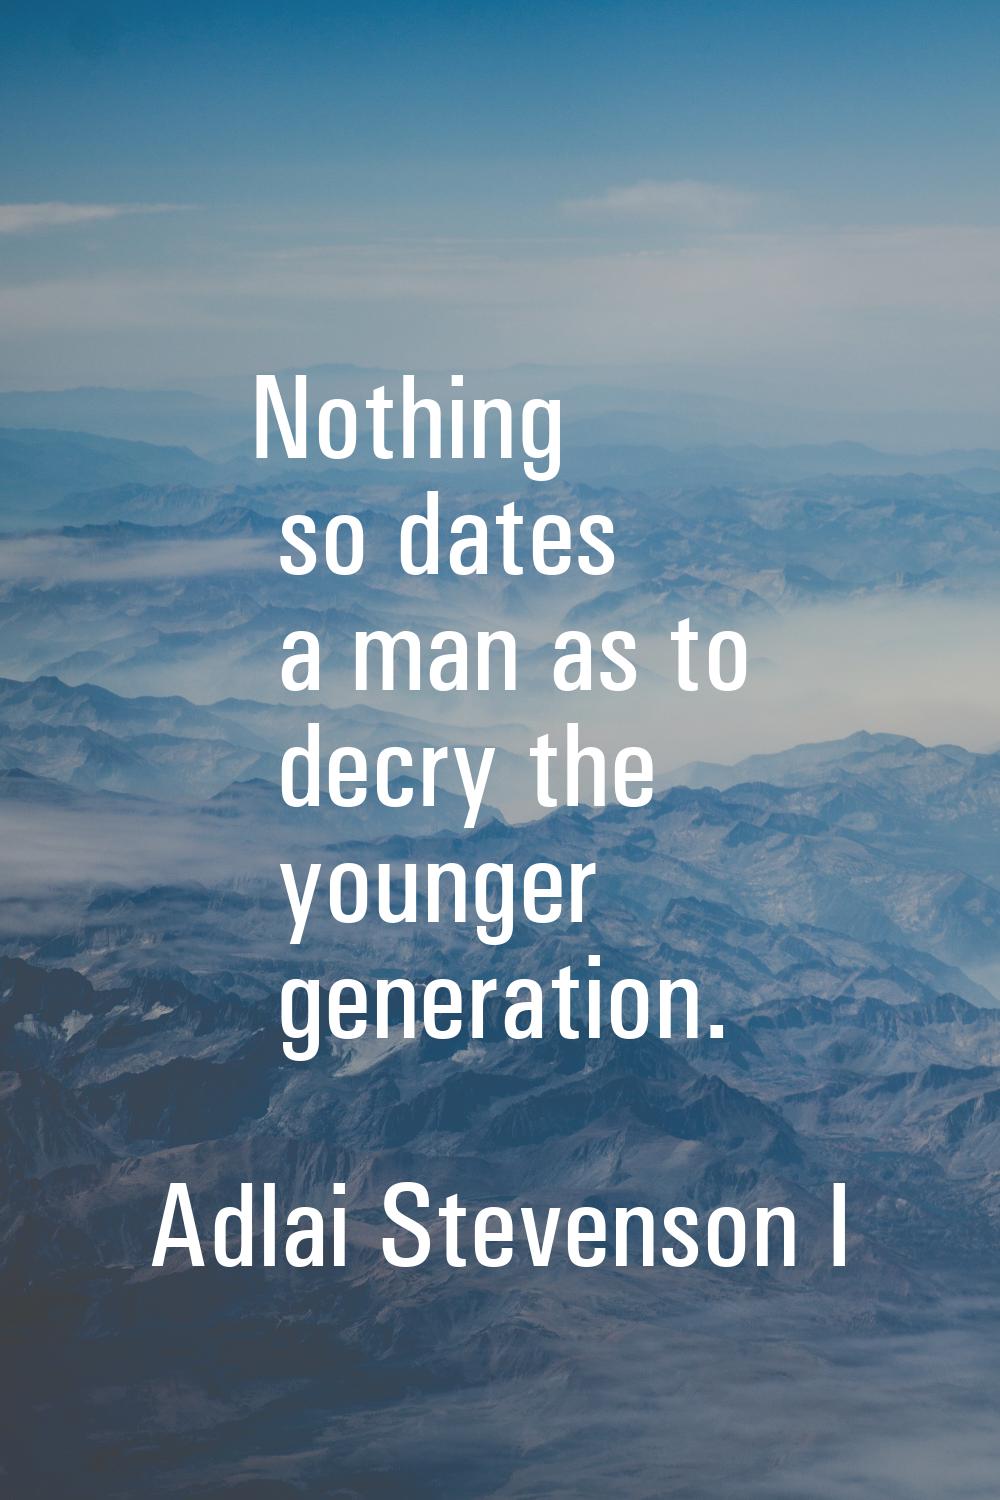 Nothing so dates a man as to decry the younger generation.